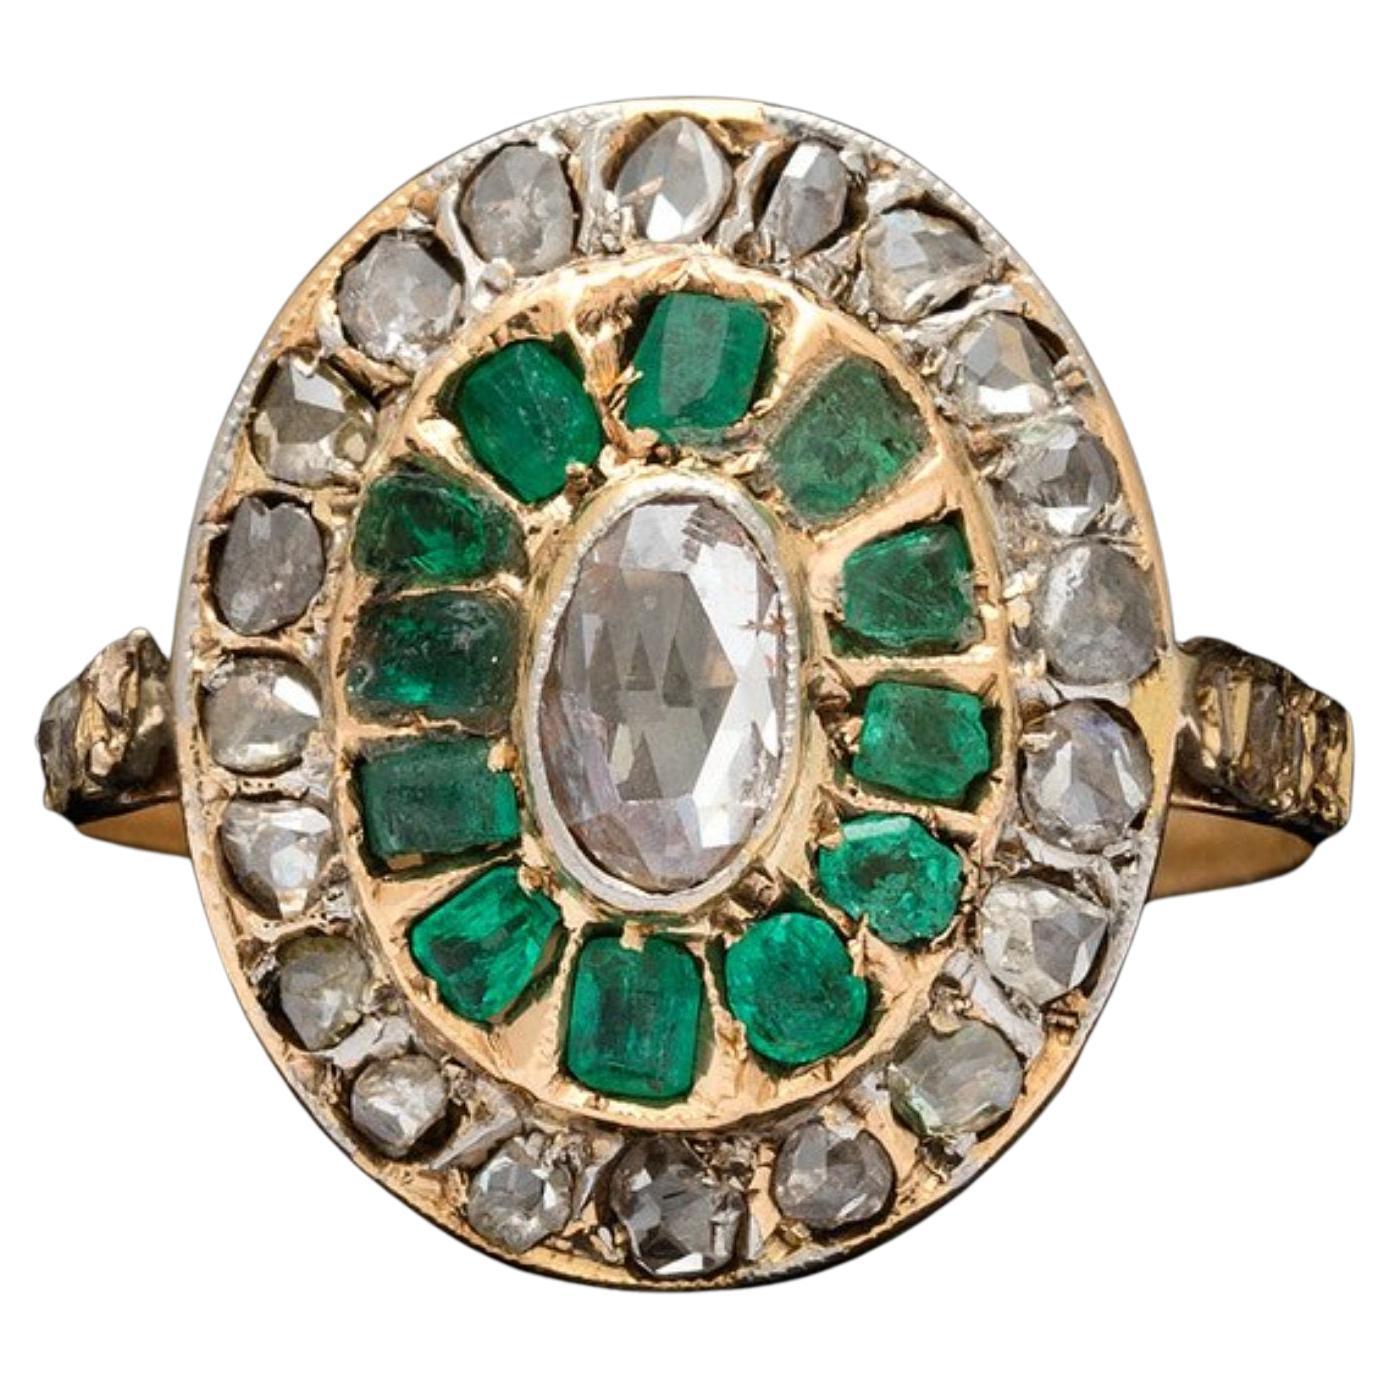 For Sale:  Vintage Style 3.05 Natural Diamond Emerald Fashion Ring in 18K Yellow Gold